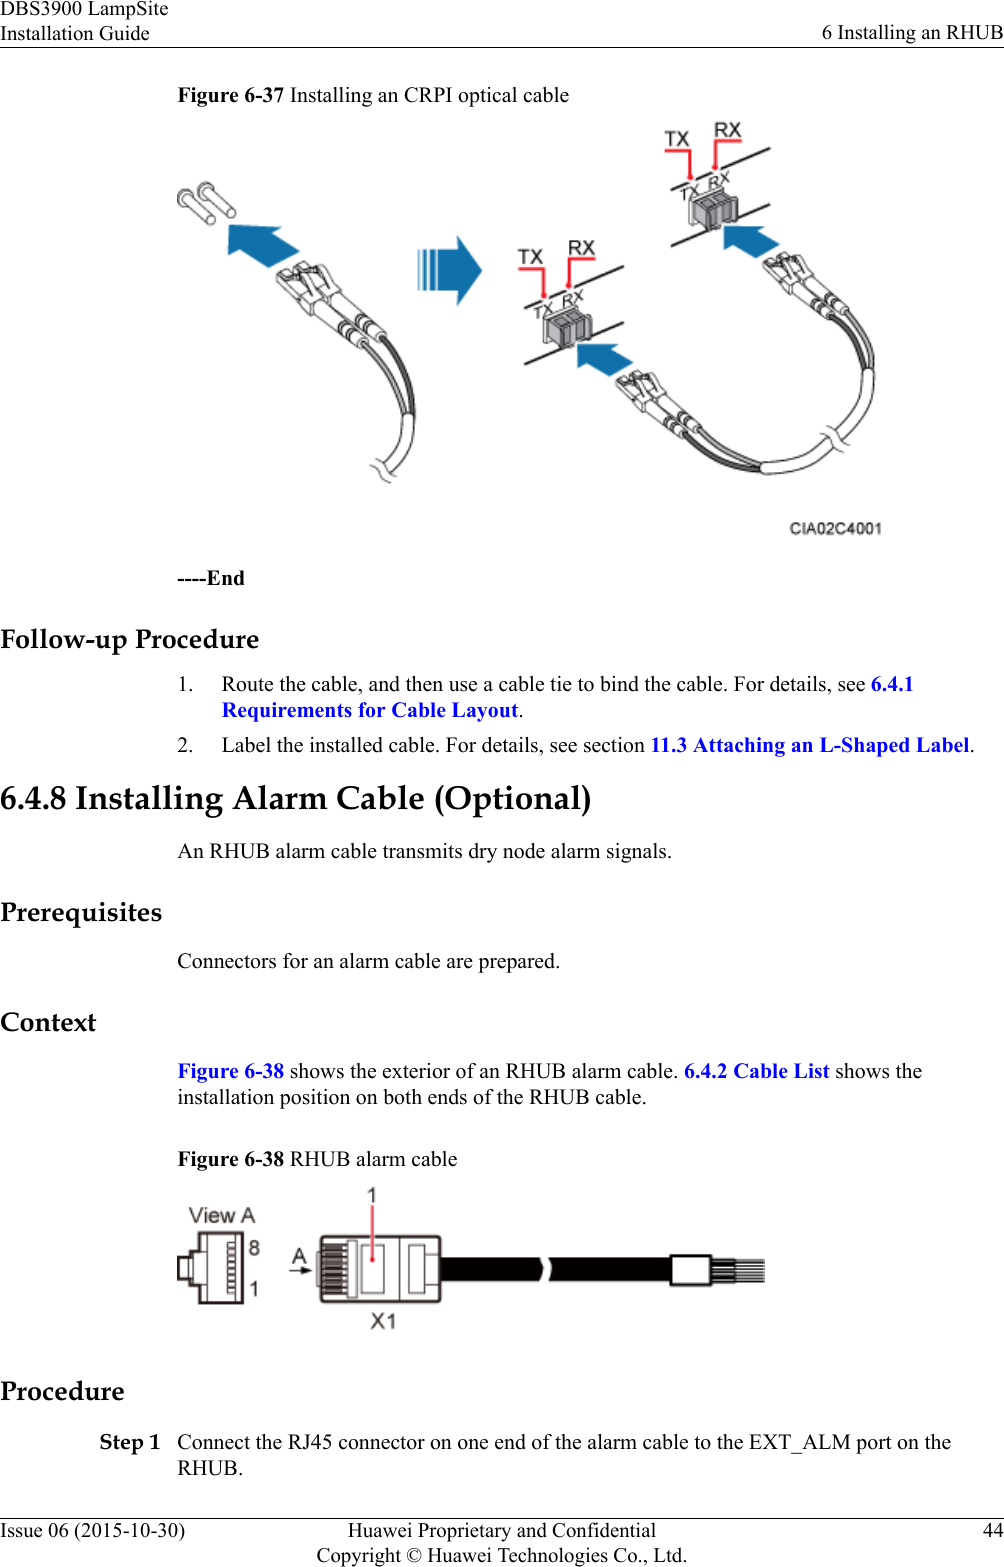 Figure 6-37 Installing an CRPI optical cable----EndFollow-up Procedure1. Route the cable, and then use a cable tie to bind the cable. For details, see 6.4.1Requirements for Cable Layout.2. Label the installed cable. For details, see section 11.3 Attaching an L-Shaped Label.6.4.8 Installing Alarm Cable (Optional)An RHUB alarm cable transmits dry node alarm signals.PrerequisitesConnectors for an alarm cable are prepared.ContextFigure 6-38 shows the exterior of an RHUB alarm cable. 6.4.2 Cable List shows theinstallation position on both ends of the RHUB cable.Figure 6-38 RHUB alarm cableProcedureStep 1 Connect the RJ45 connector on one end of the alarm cable to the EXT_ALM port on theRHUB.DBS3900 LampSiteInstallation Guide 6 Installing an RHUBIssue 06 (2015-10-30) Huawei Proprietary and ConfidentialCopyright © Huawei Technologies Co., Ltd.44